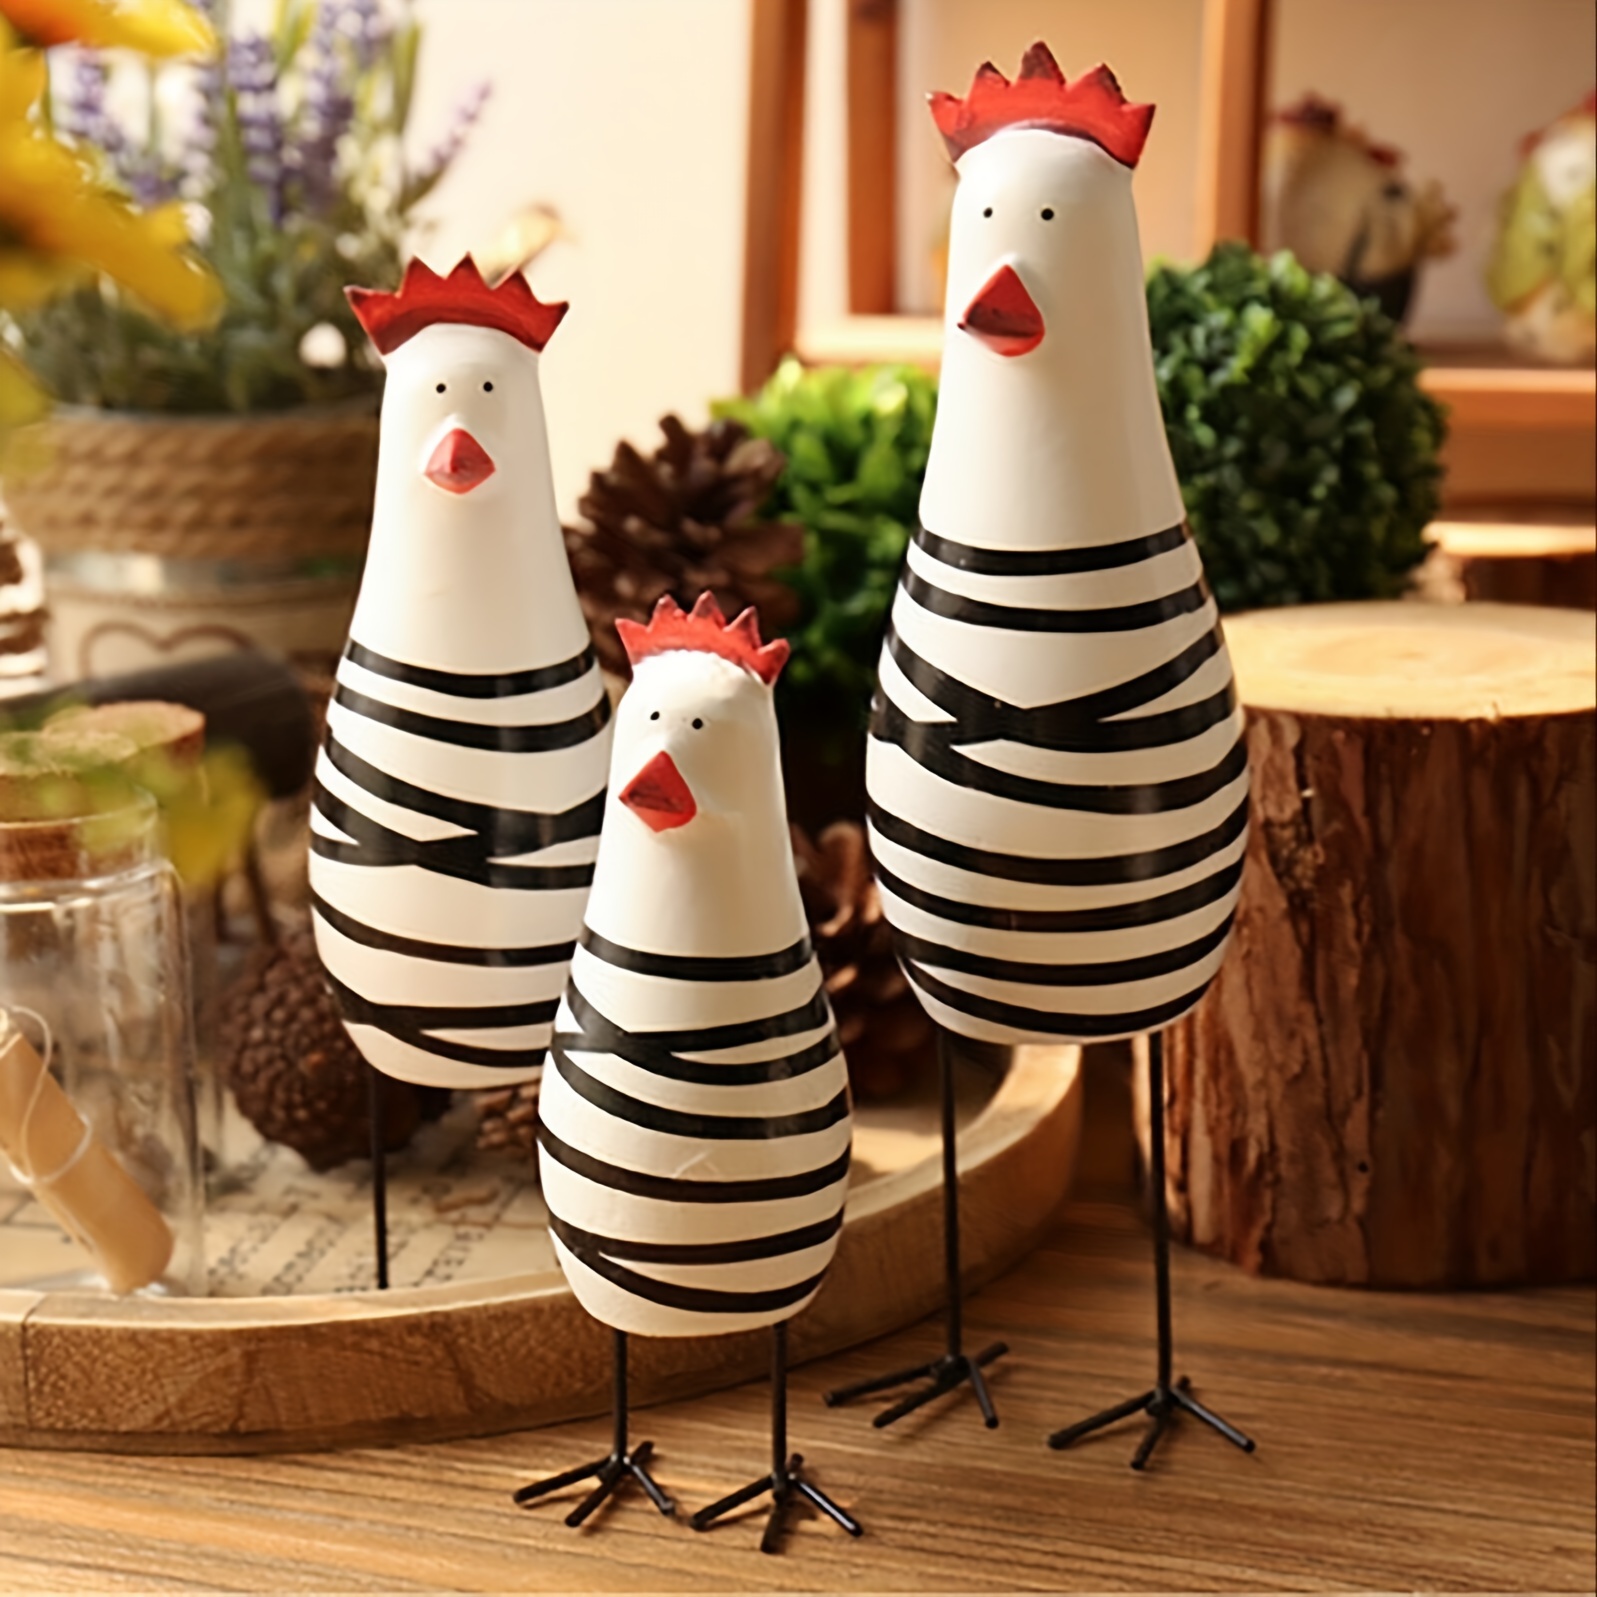 Wood Carving Decoration Figurines, Small Figurines Decoration